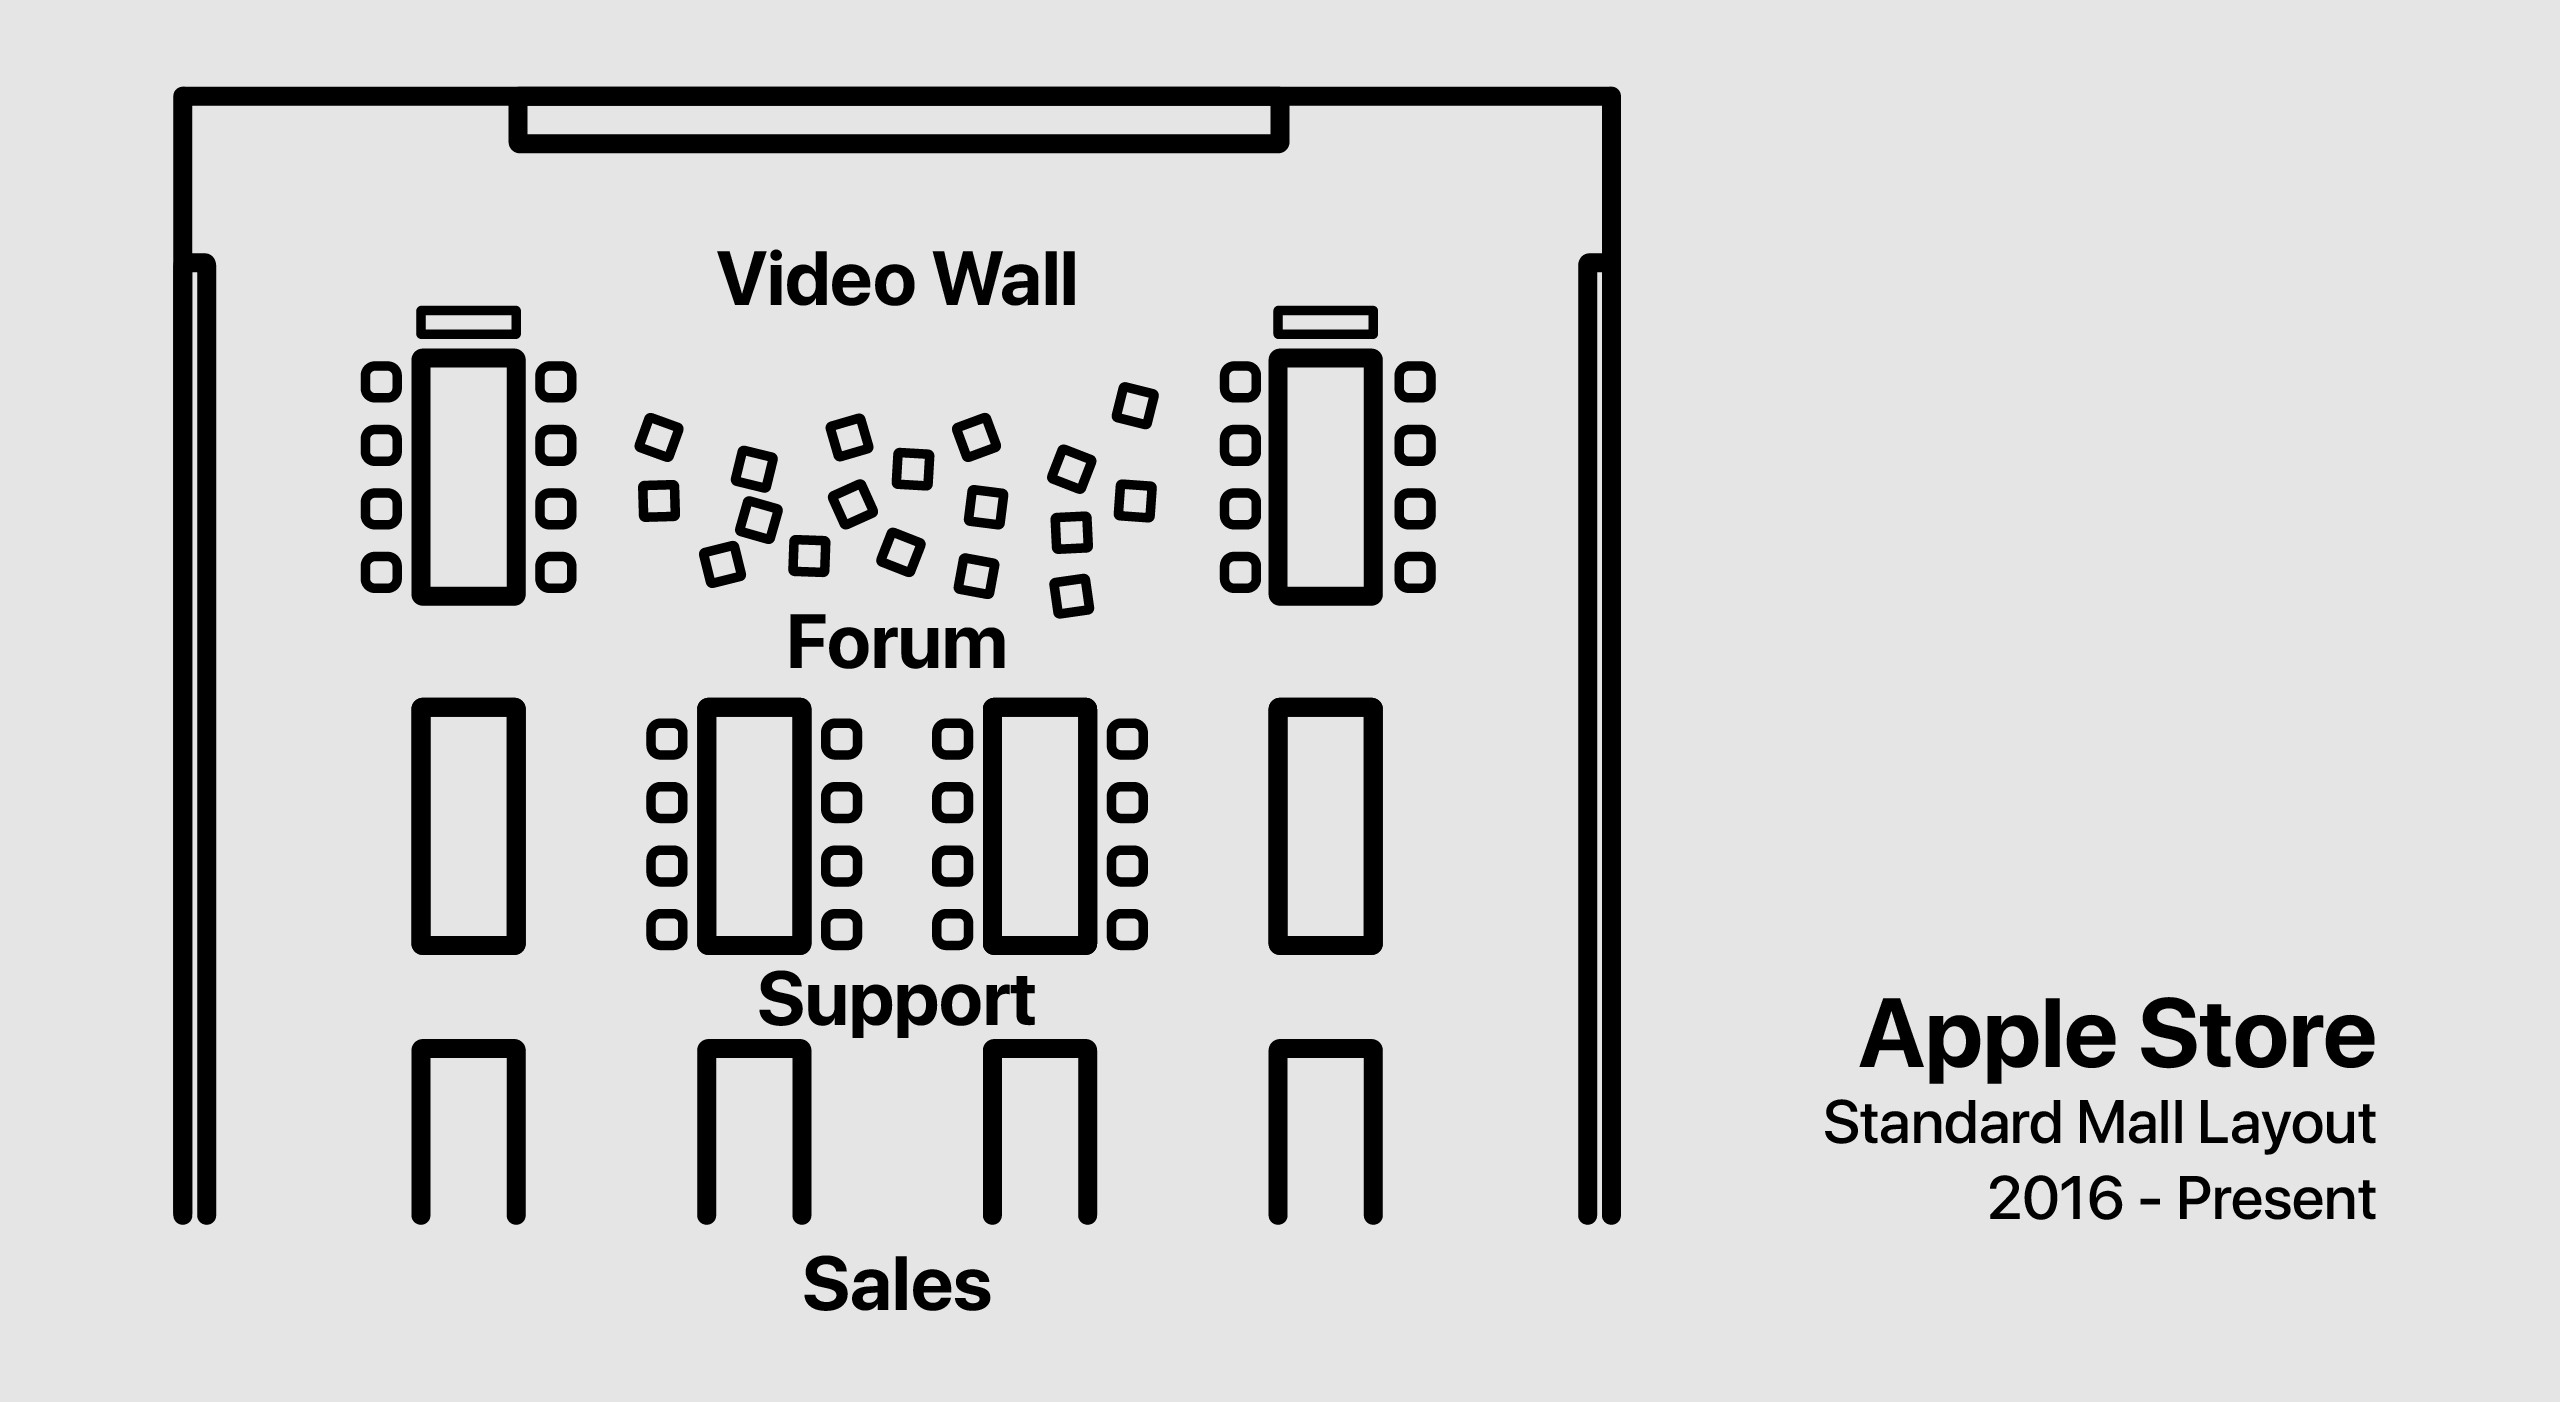 Standard Apple Store Mall Layout Today at Apple Year in Review